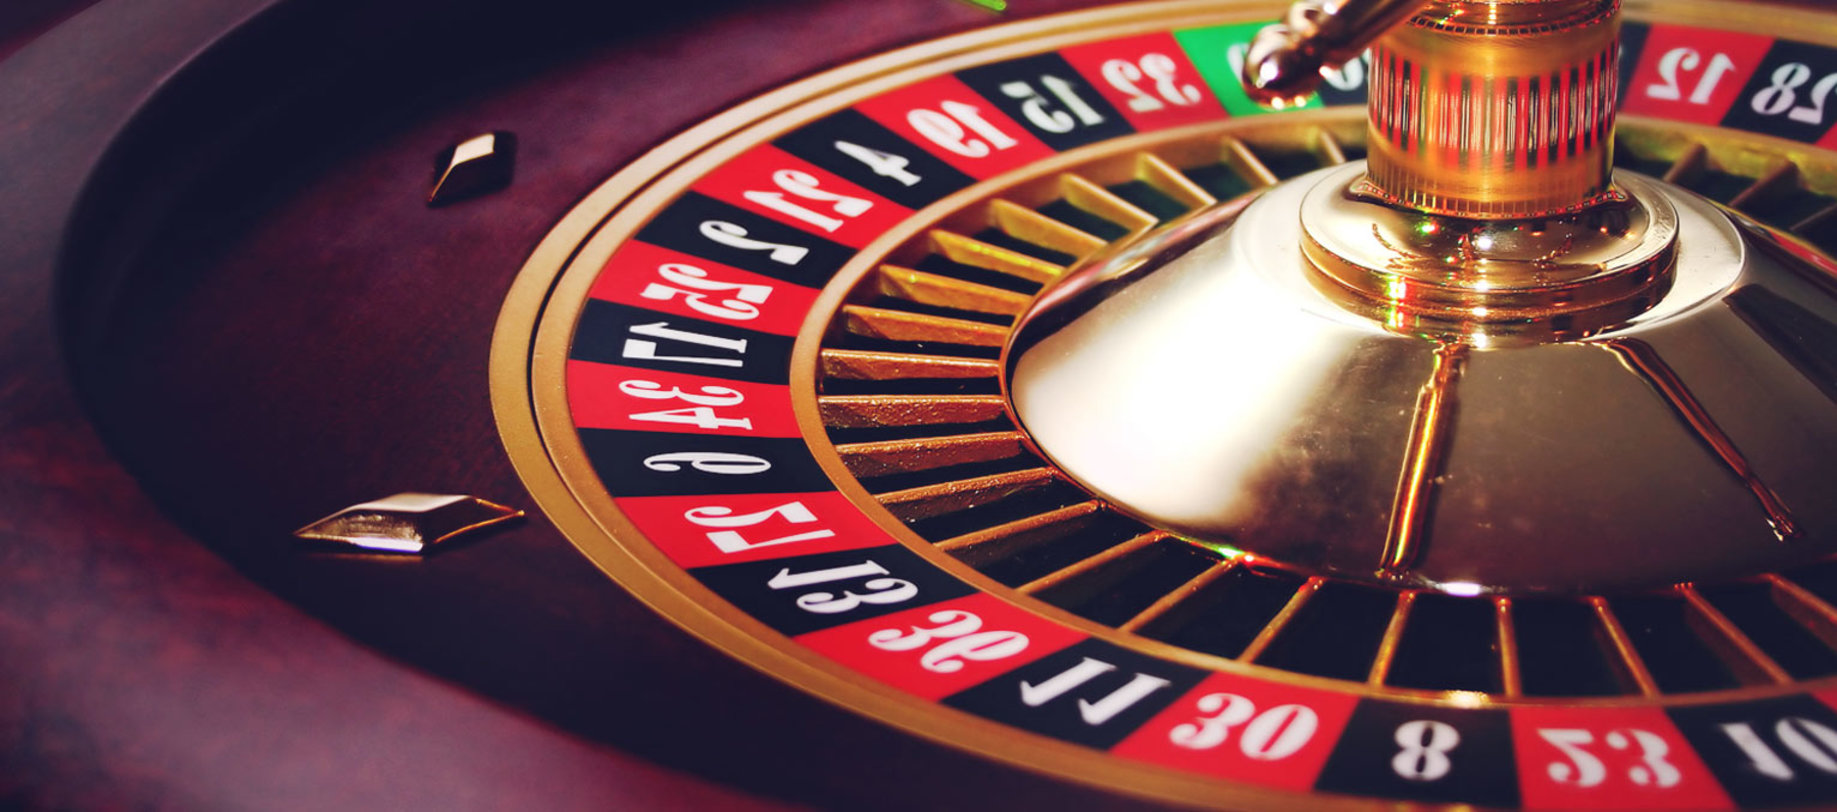 South Africa doubles down on gambling regulations